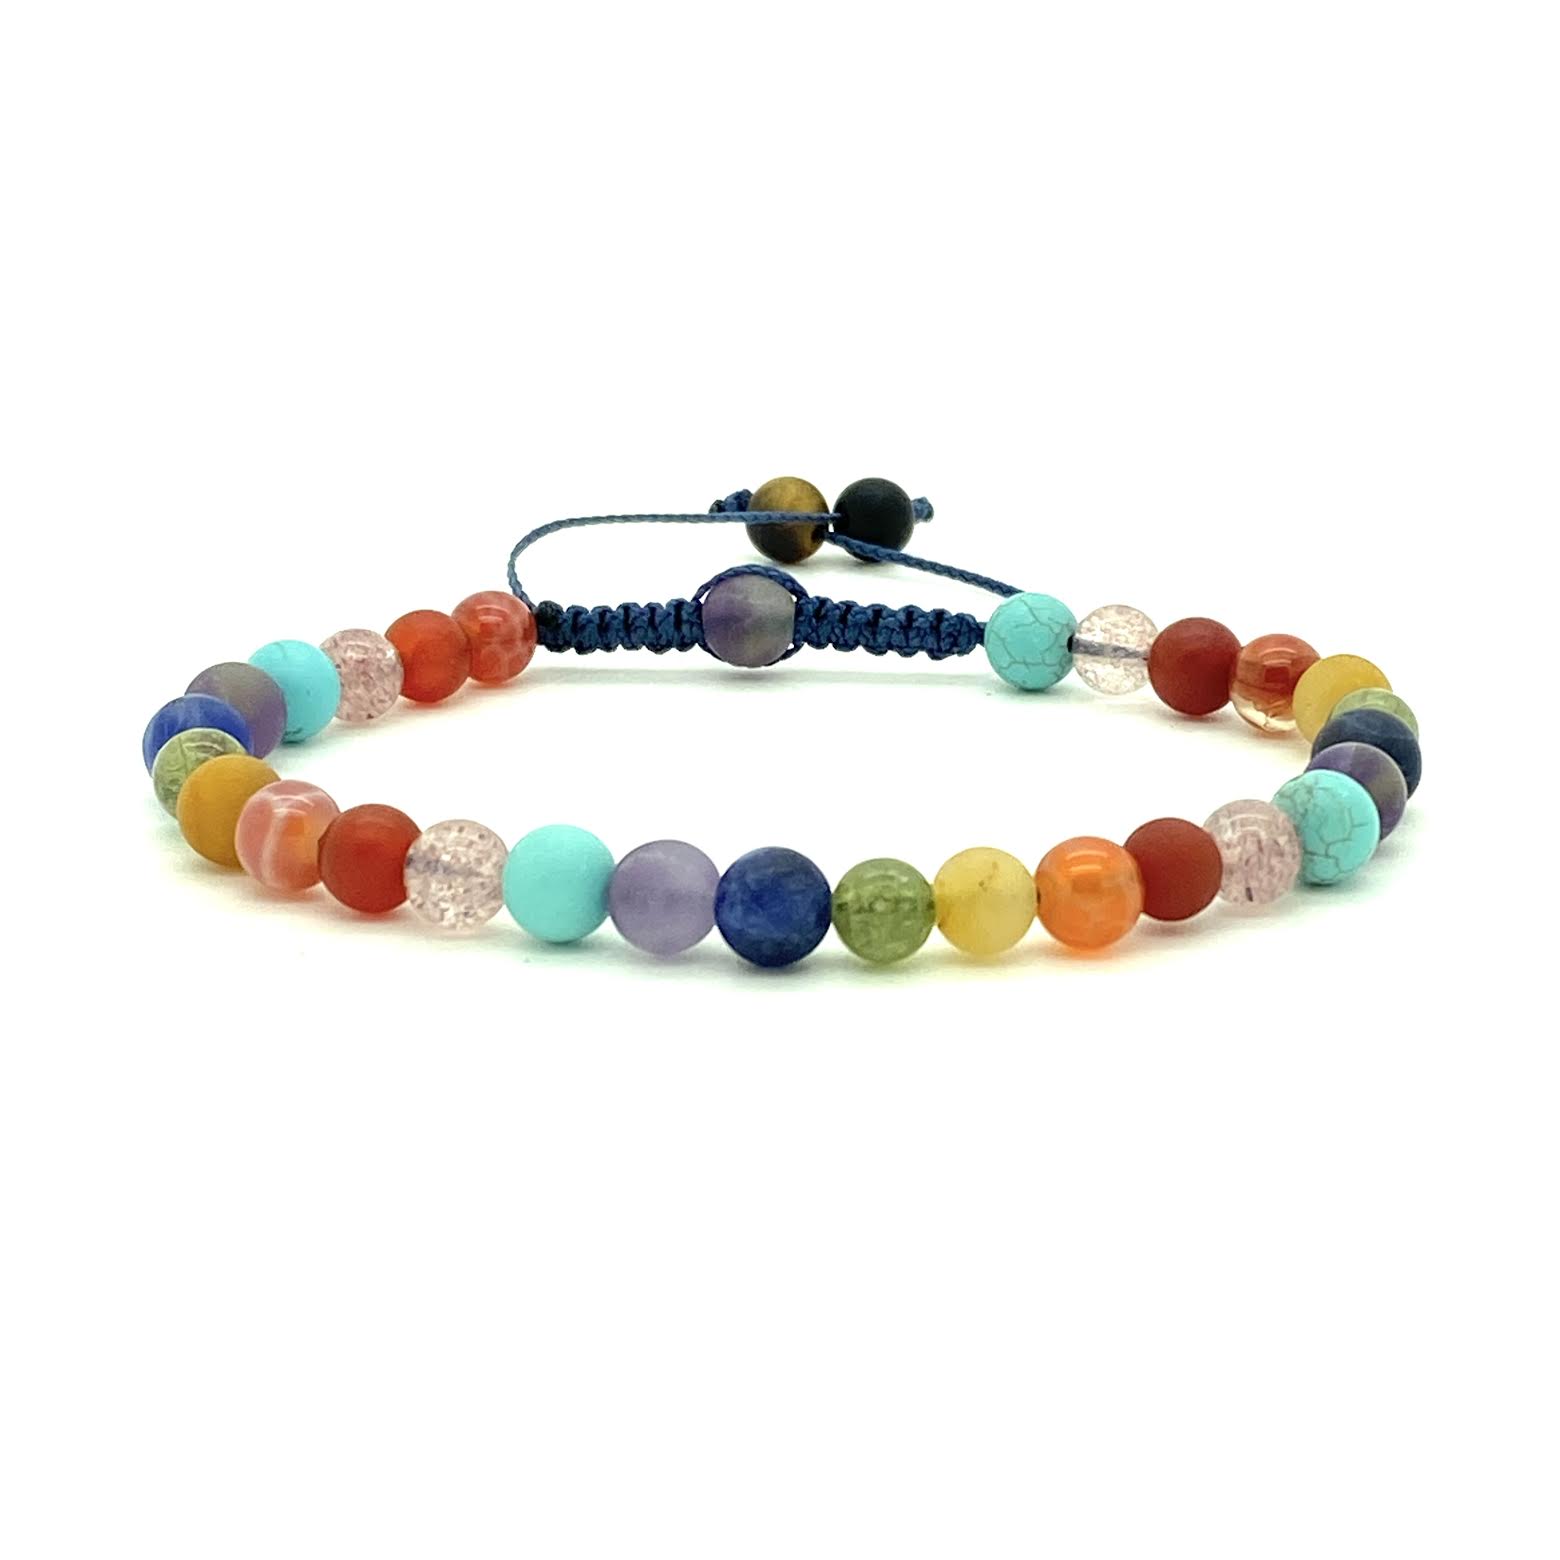 Get your Pride on! This popular, assorted gemstone beaded bracelet gives off a cool, confident vibe. Hand knotted adjustable cord for a perfect fit. We are a lesbian owned company and proudly support our community! Made by WristBend